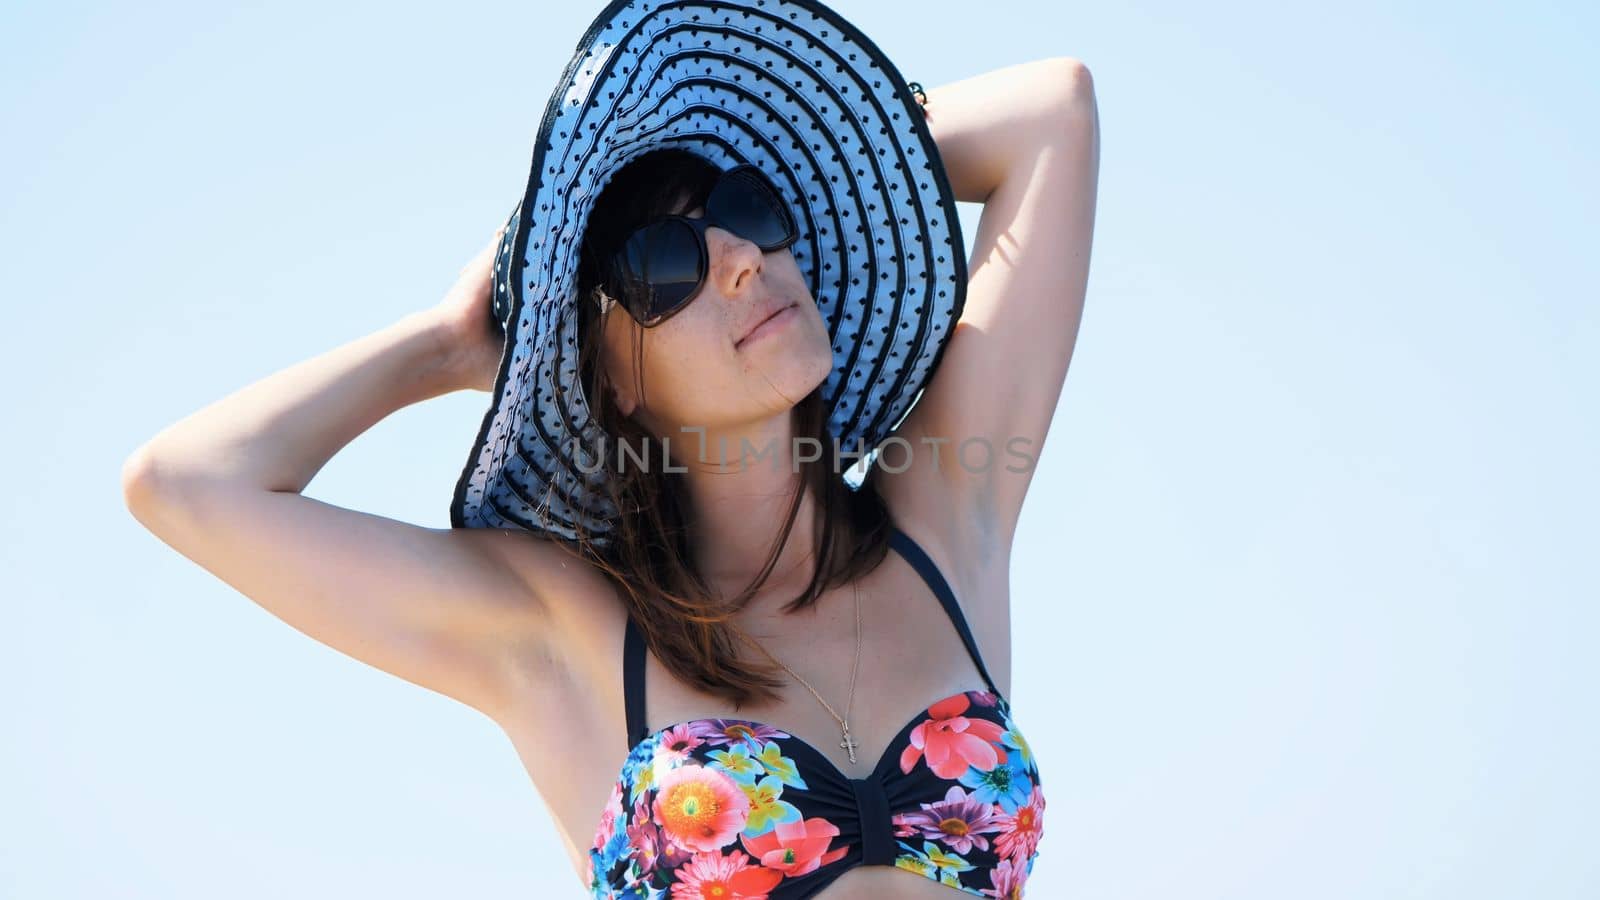 summer, sea, portrait of a beautiful young brunette woman wearing a bathing suit and sun hat, sunglasses, standing on a ferry deck, enjoying rest, beauty of the sea, happy, smiling. High quality photo